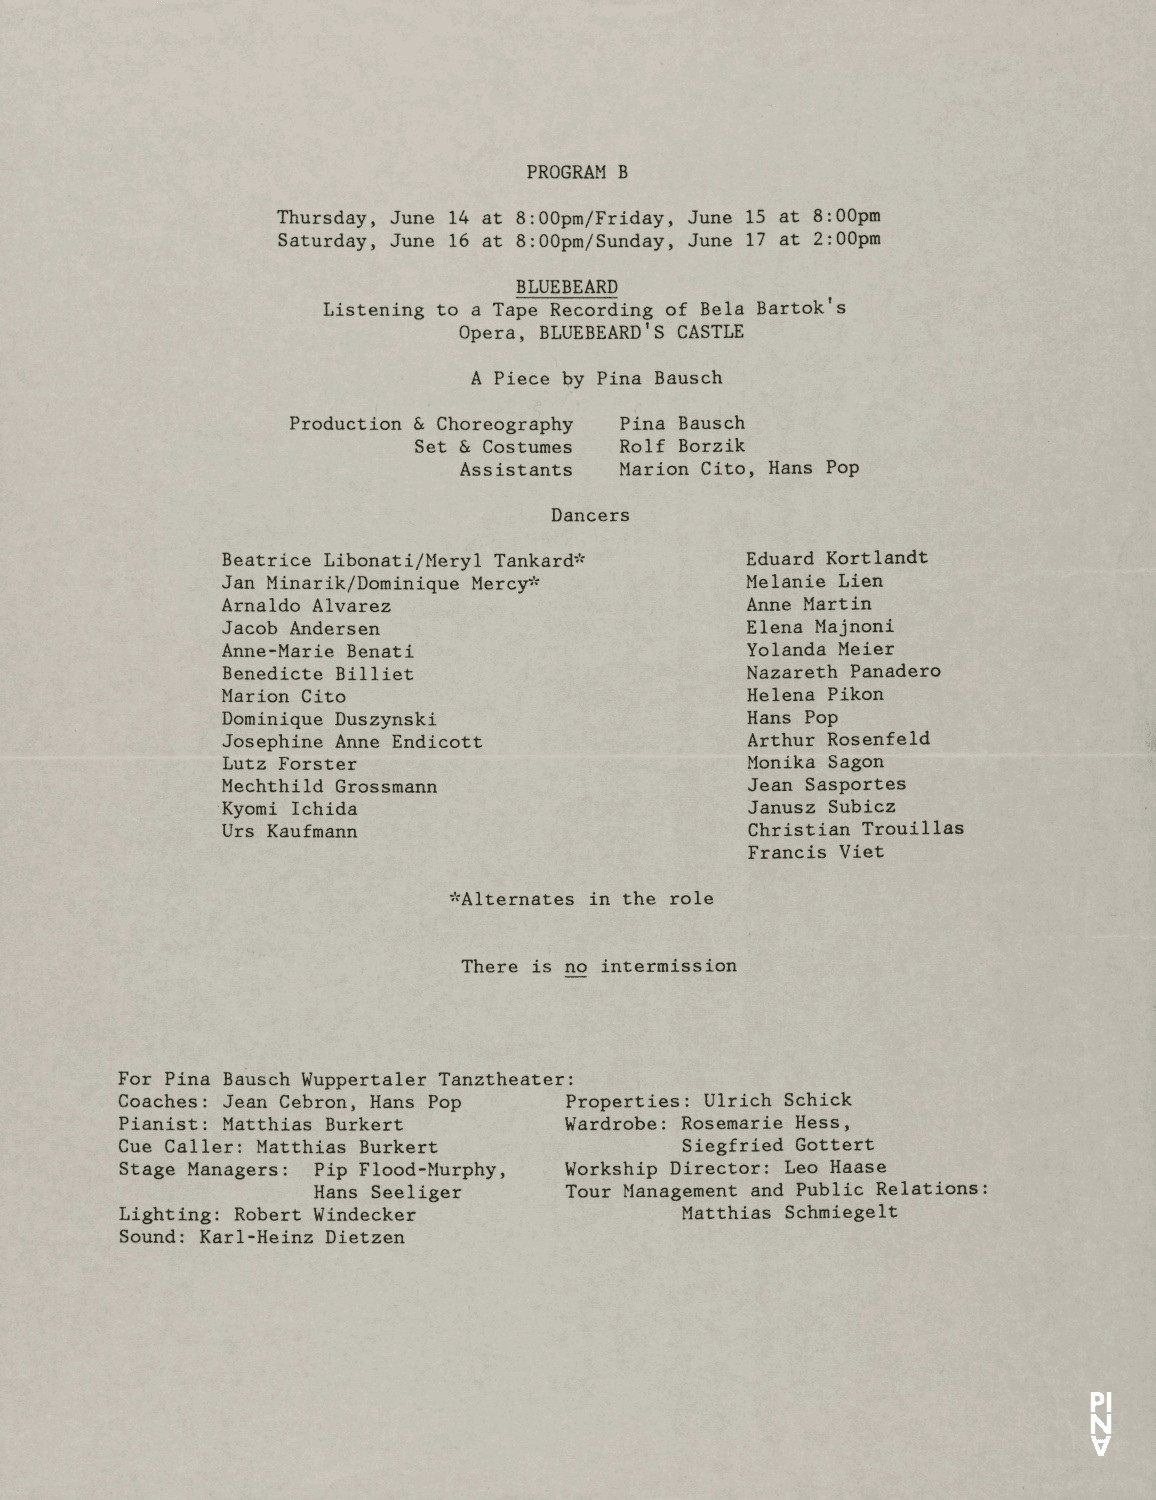 Evening leaflet for “Bluebeard. While Listening to a Tape Recording of Béla Bartók's Opera "Duke Bluebeard's Castle"” by Pina Bausch with Tanztheater Wuppertal in in New York, 06/14/1984 – 06/17/1984